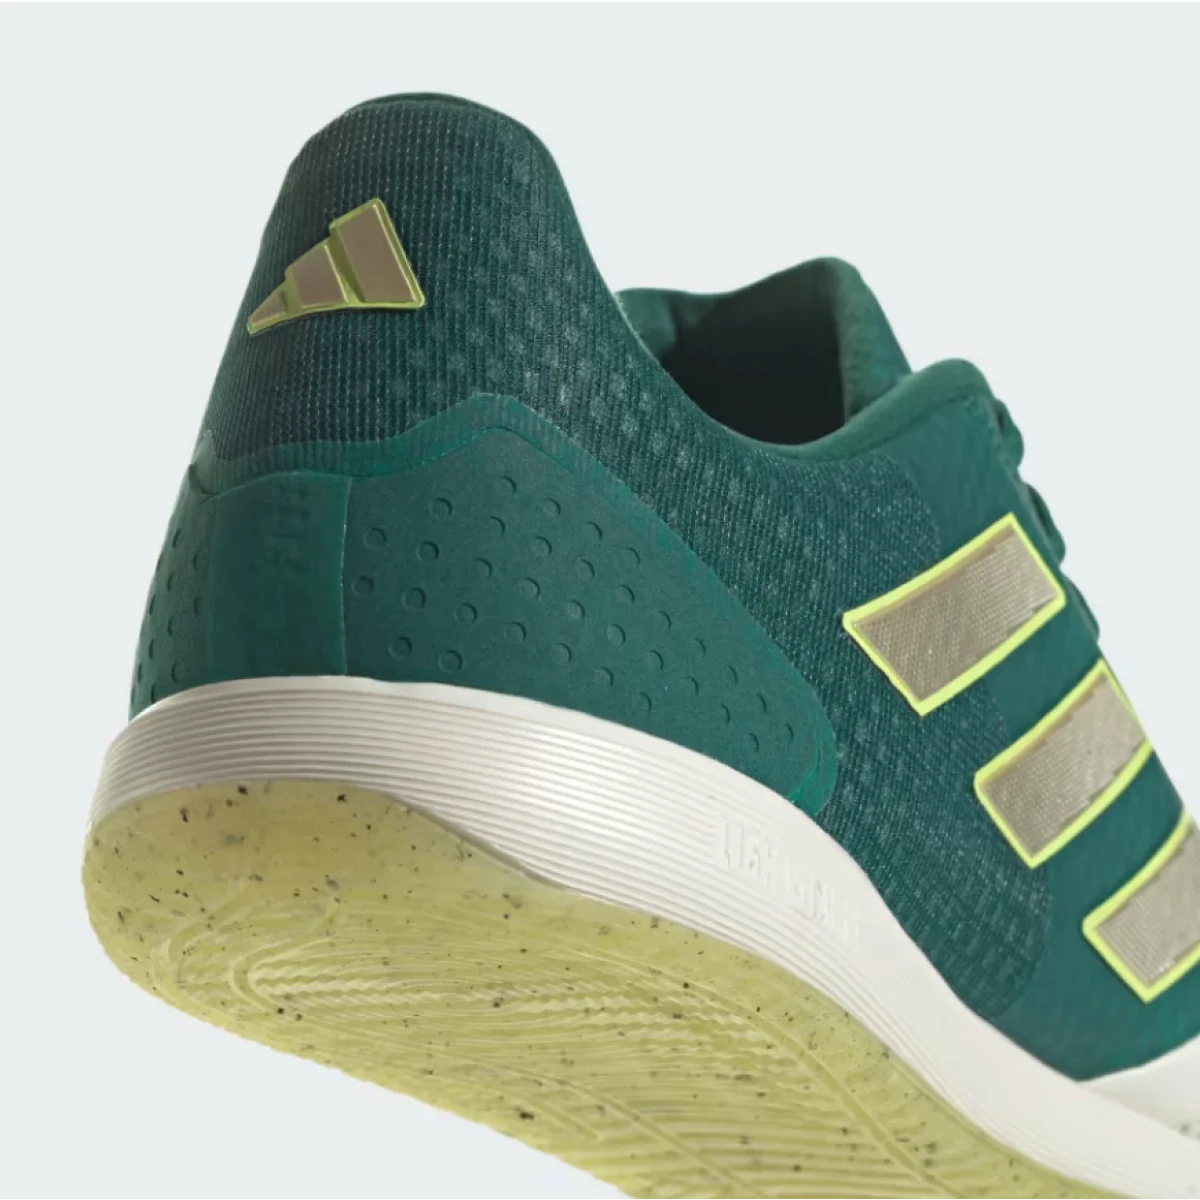 ADIDAS Patike TOP SALA COMPETITION - IE1548